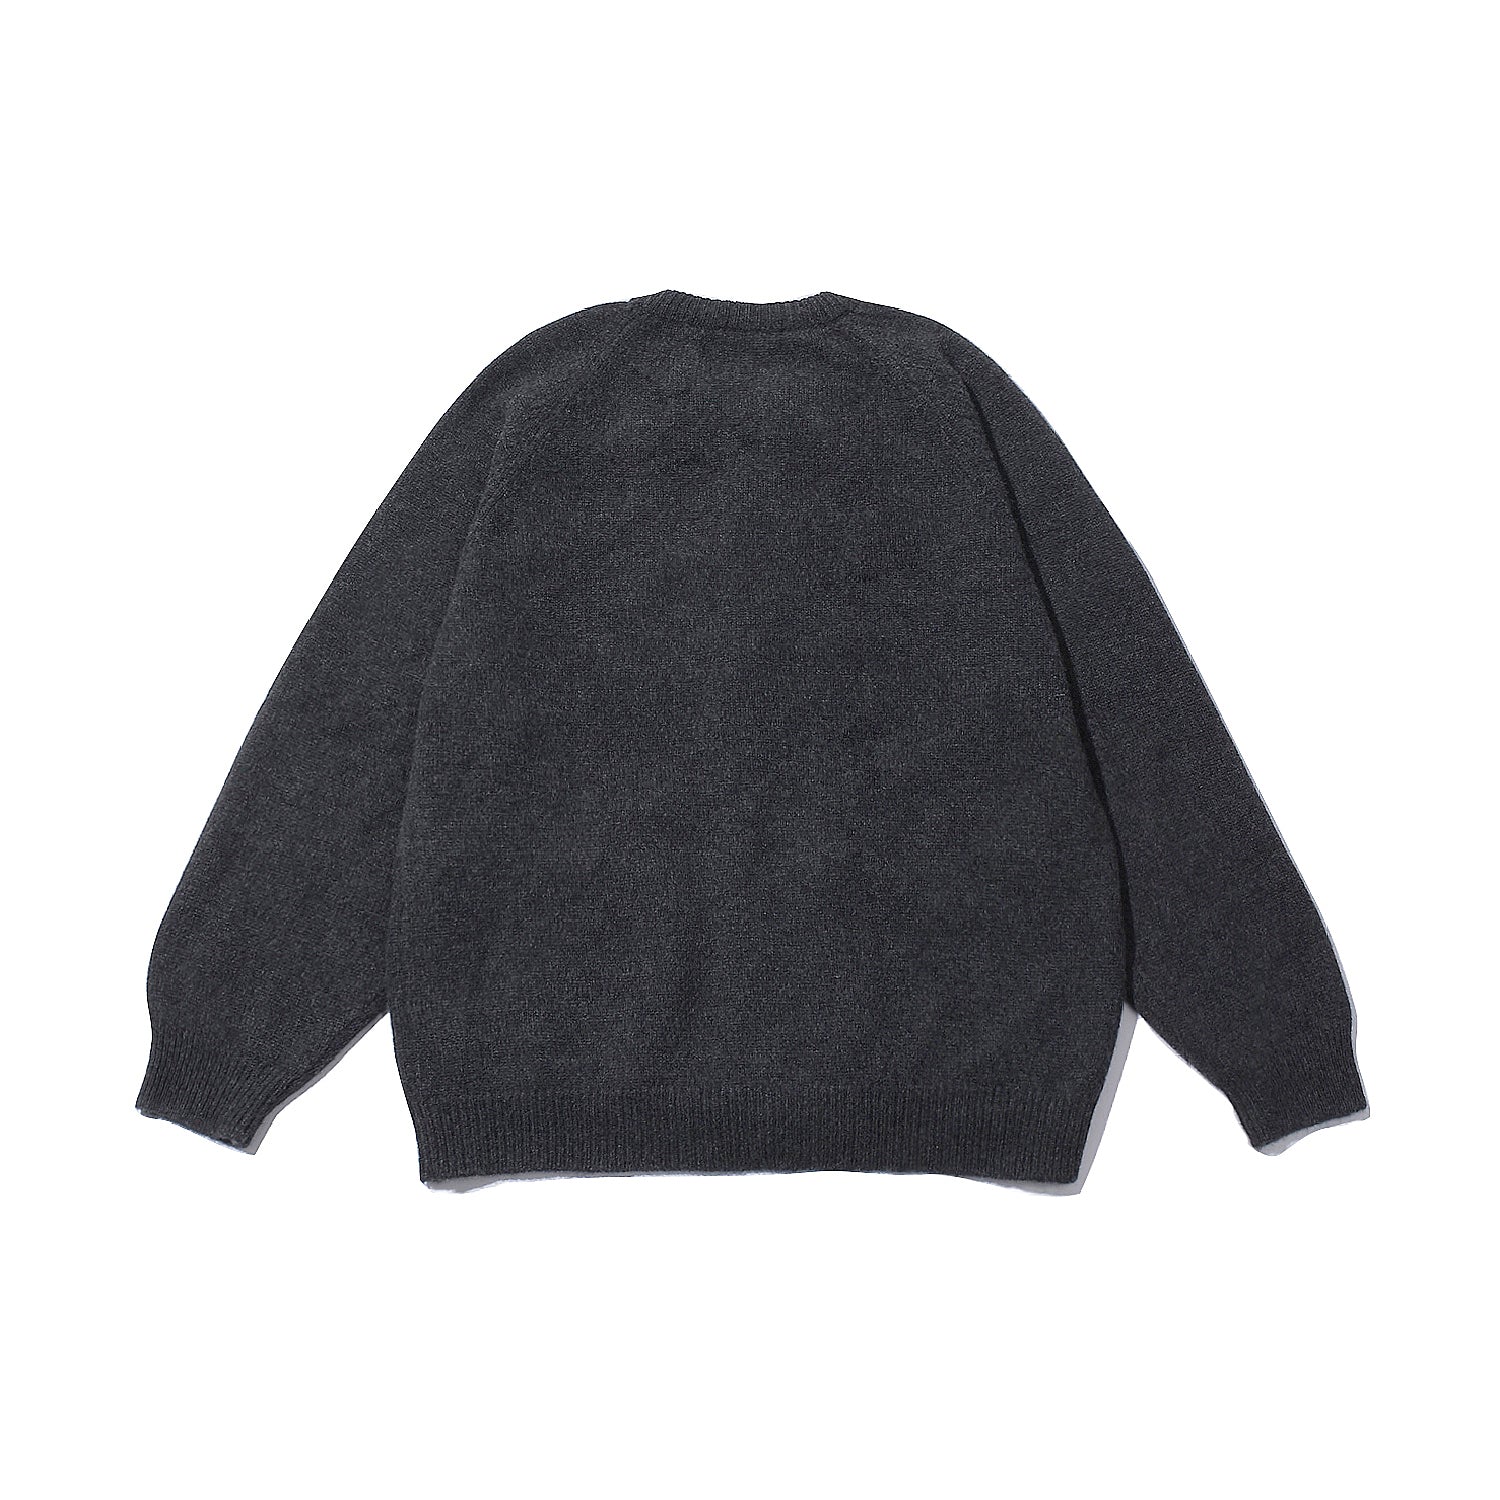 Charcoal Cashmere Cardigan